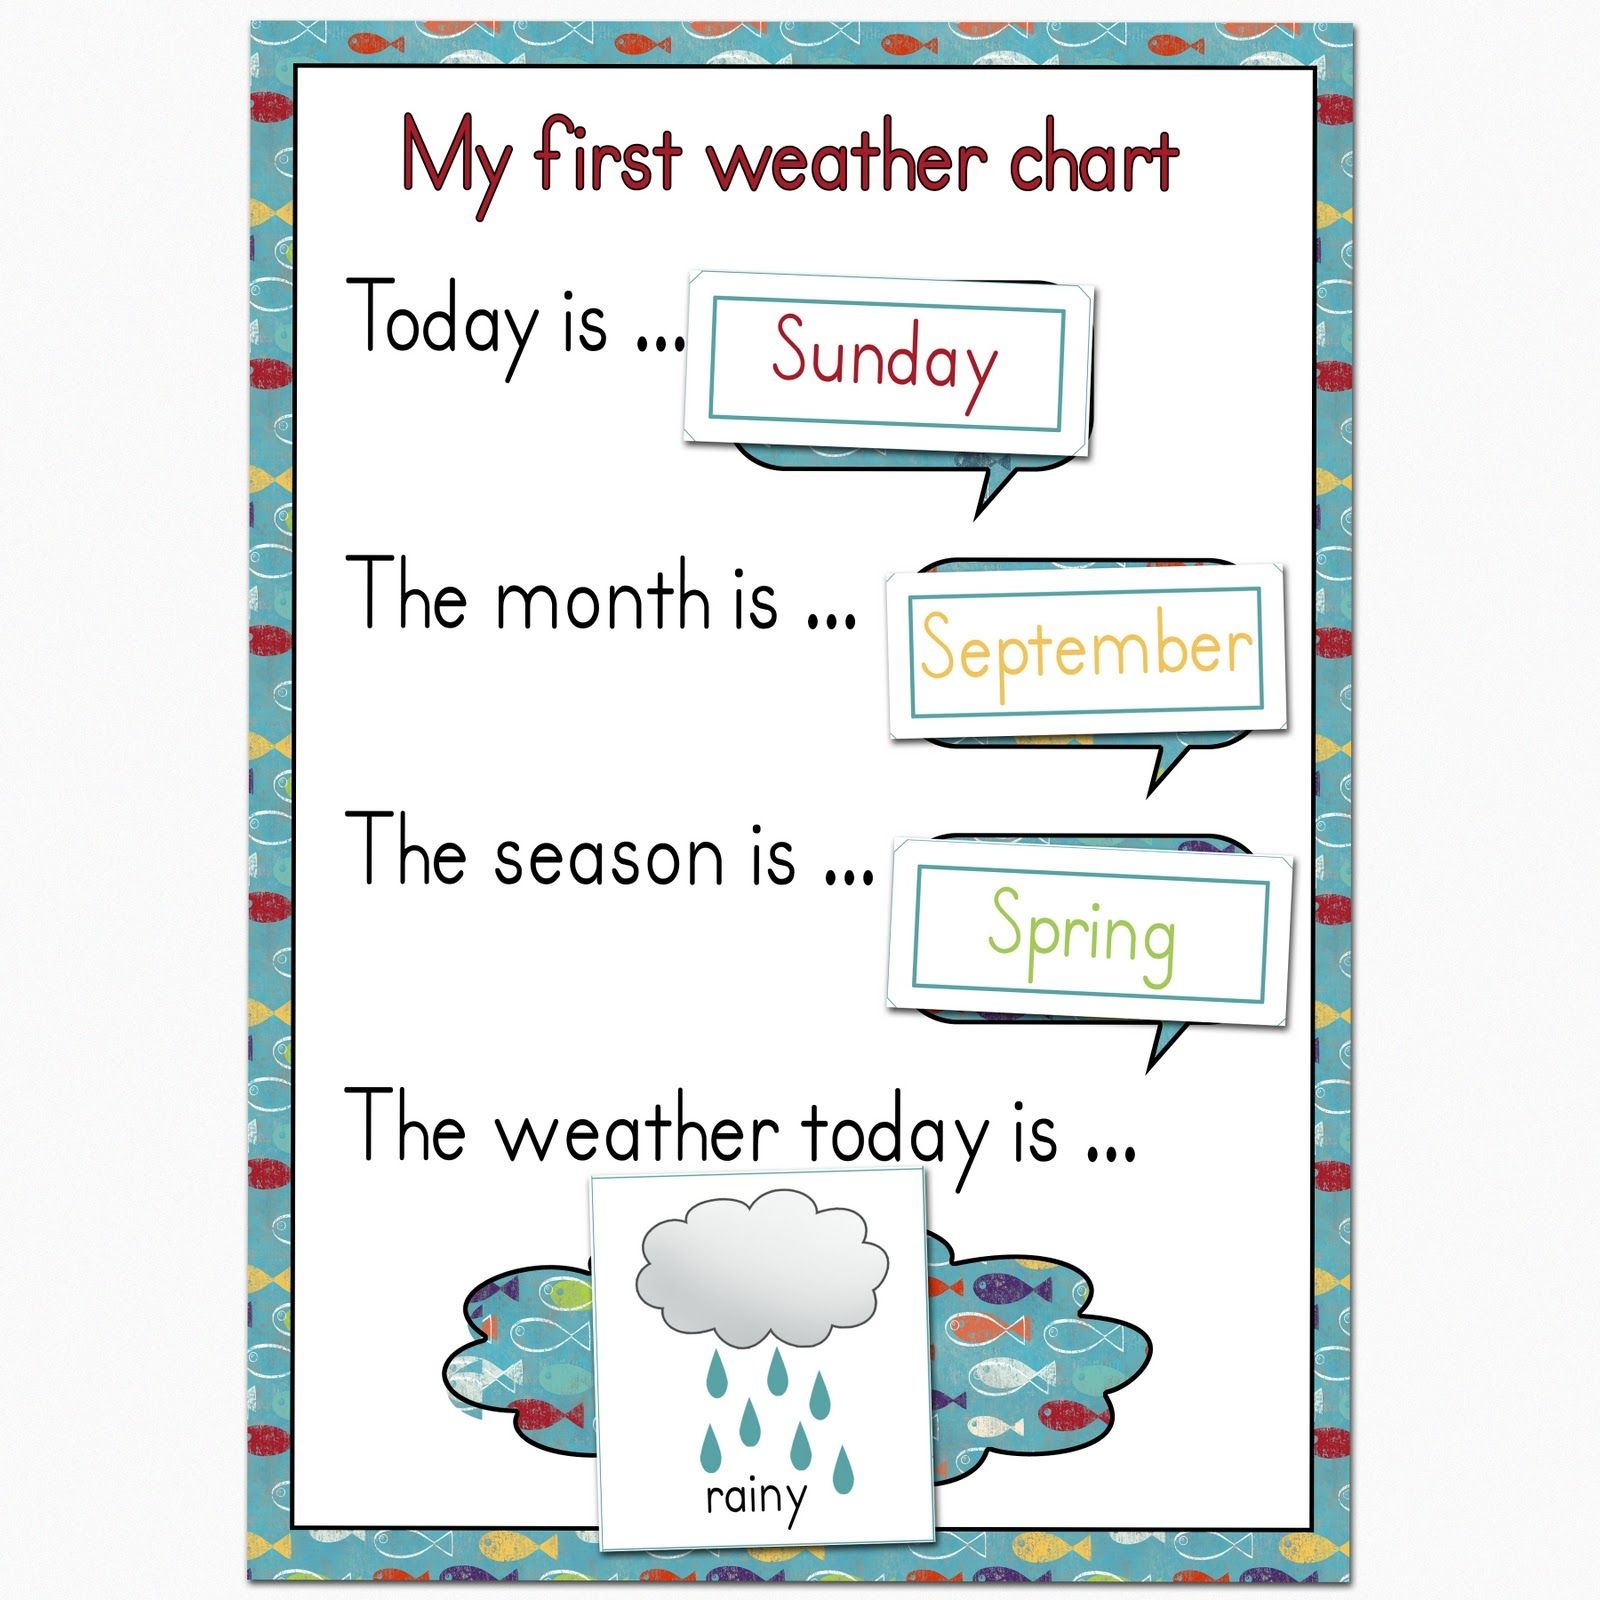 Preschool Weather Chart | Plan To Keep Mine On The Fridge, And Use - Free Printable Weather Chart For Preschool